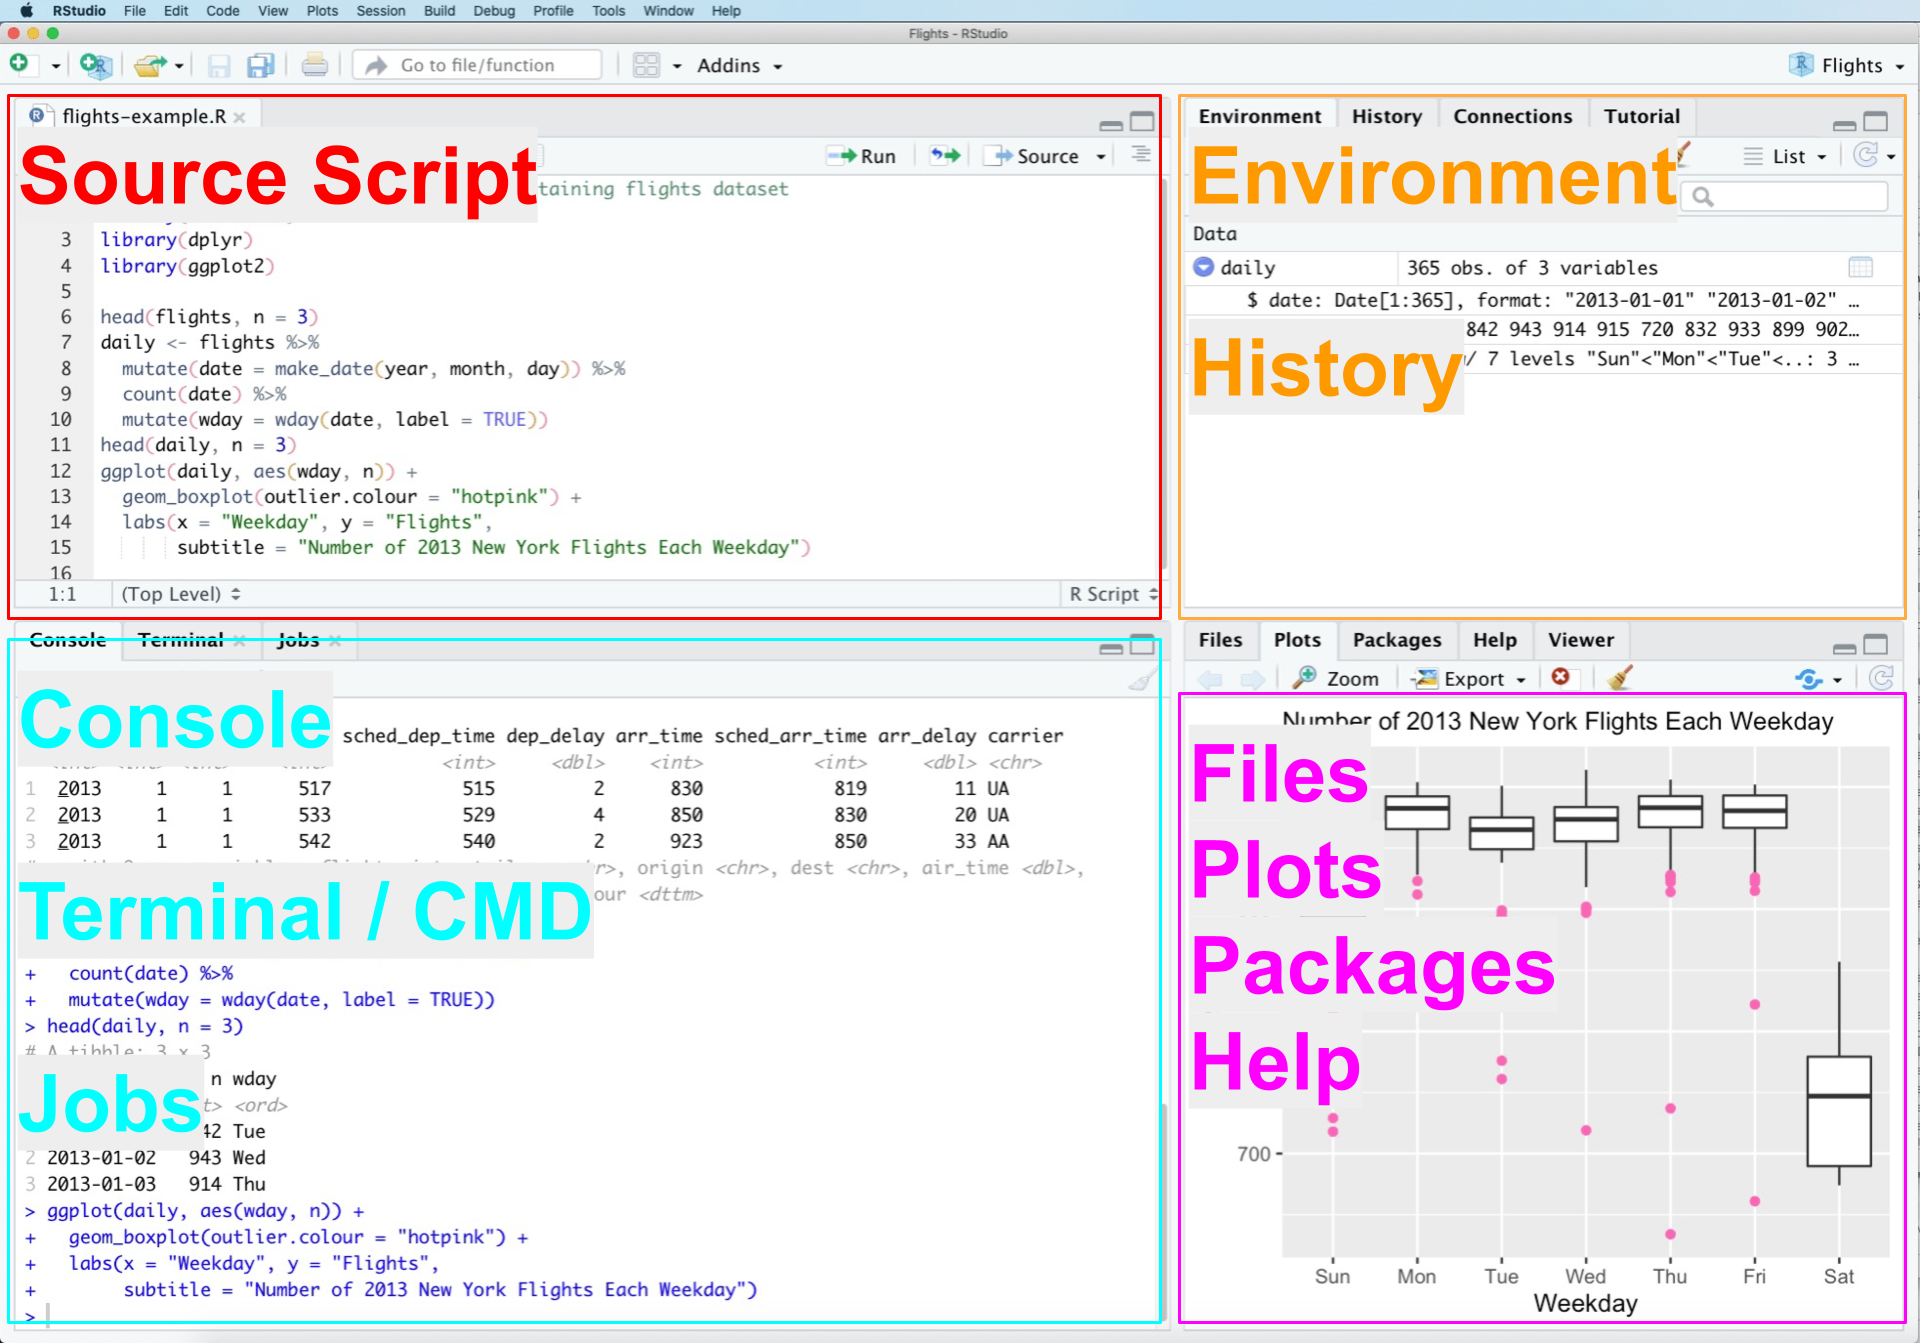 RStudio Interface (Source: <a href="https://commons.wikimedia.org/wiki/User%3ACdhowe">cdhowe</a>, <a href="https://commons.wikimedia.org/wiki/File%3ARStudio_IDE_screenshot.png">RStudio IDE screenshot, altered by Marcel Reinmuth</a>, <a href="https://creativecommons.org/licenses/by-sa/4.0/legalcode" rel="license">CC BY-SA 4.0</a> 